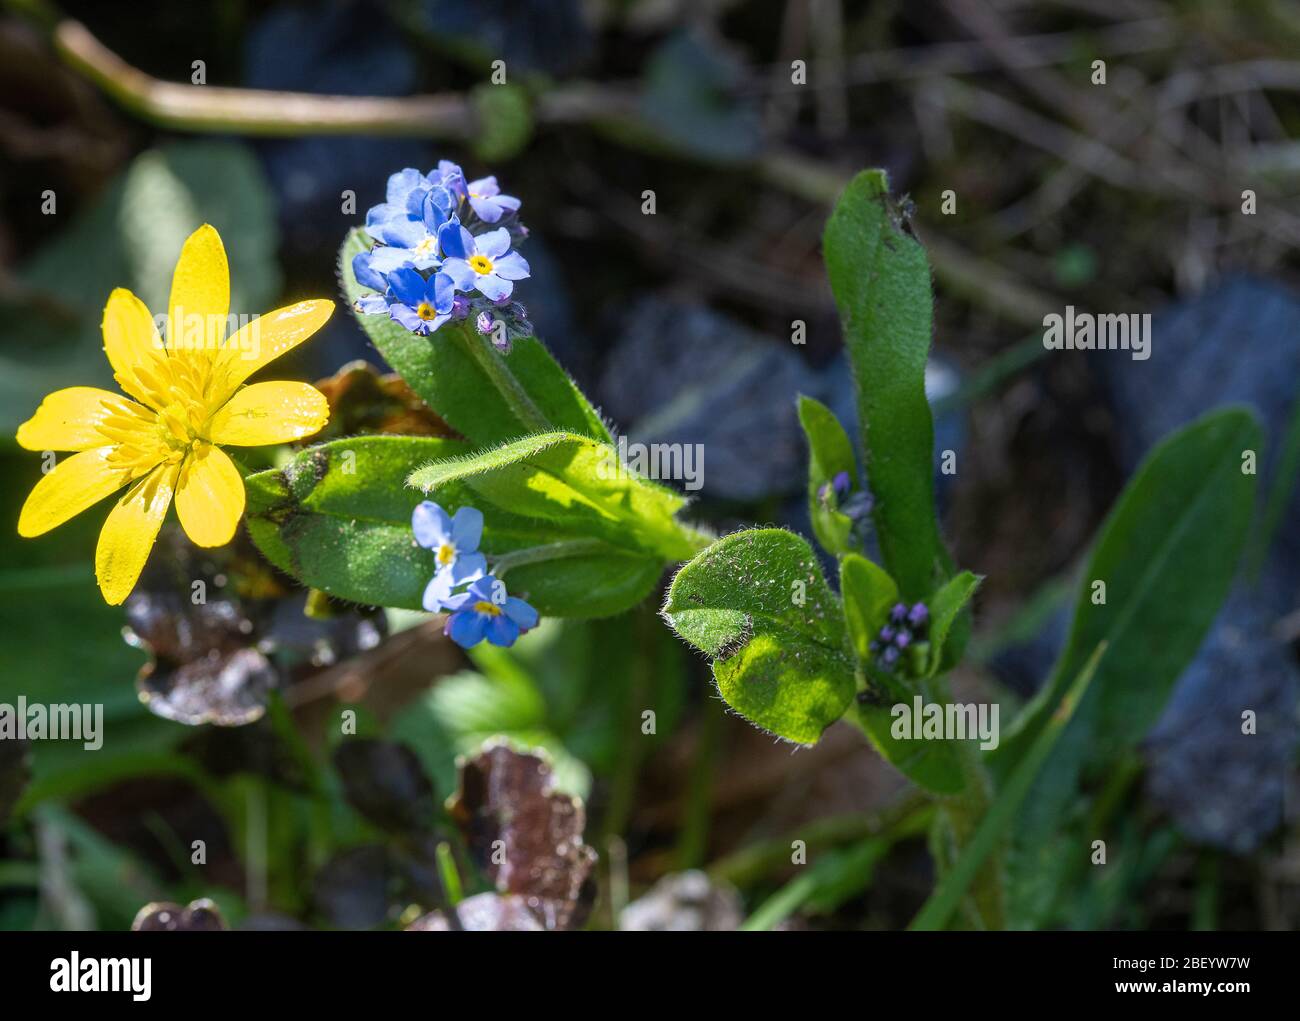 A Beautiful Lesser Celandine Flower Brazen Hussy and Pale Blue Field Forgetmenot Flowers in a Garden in Alsager Cheshire England United Kingdom UK Stock Photo